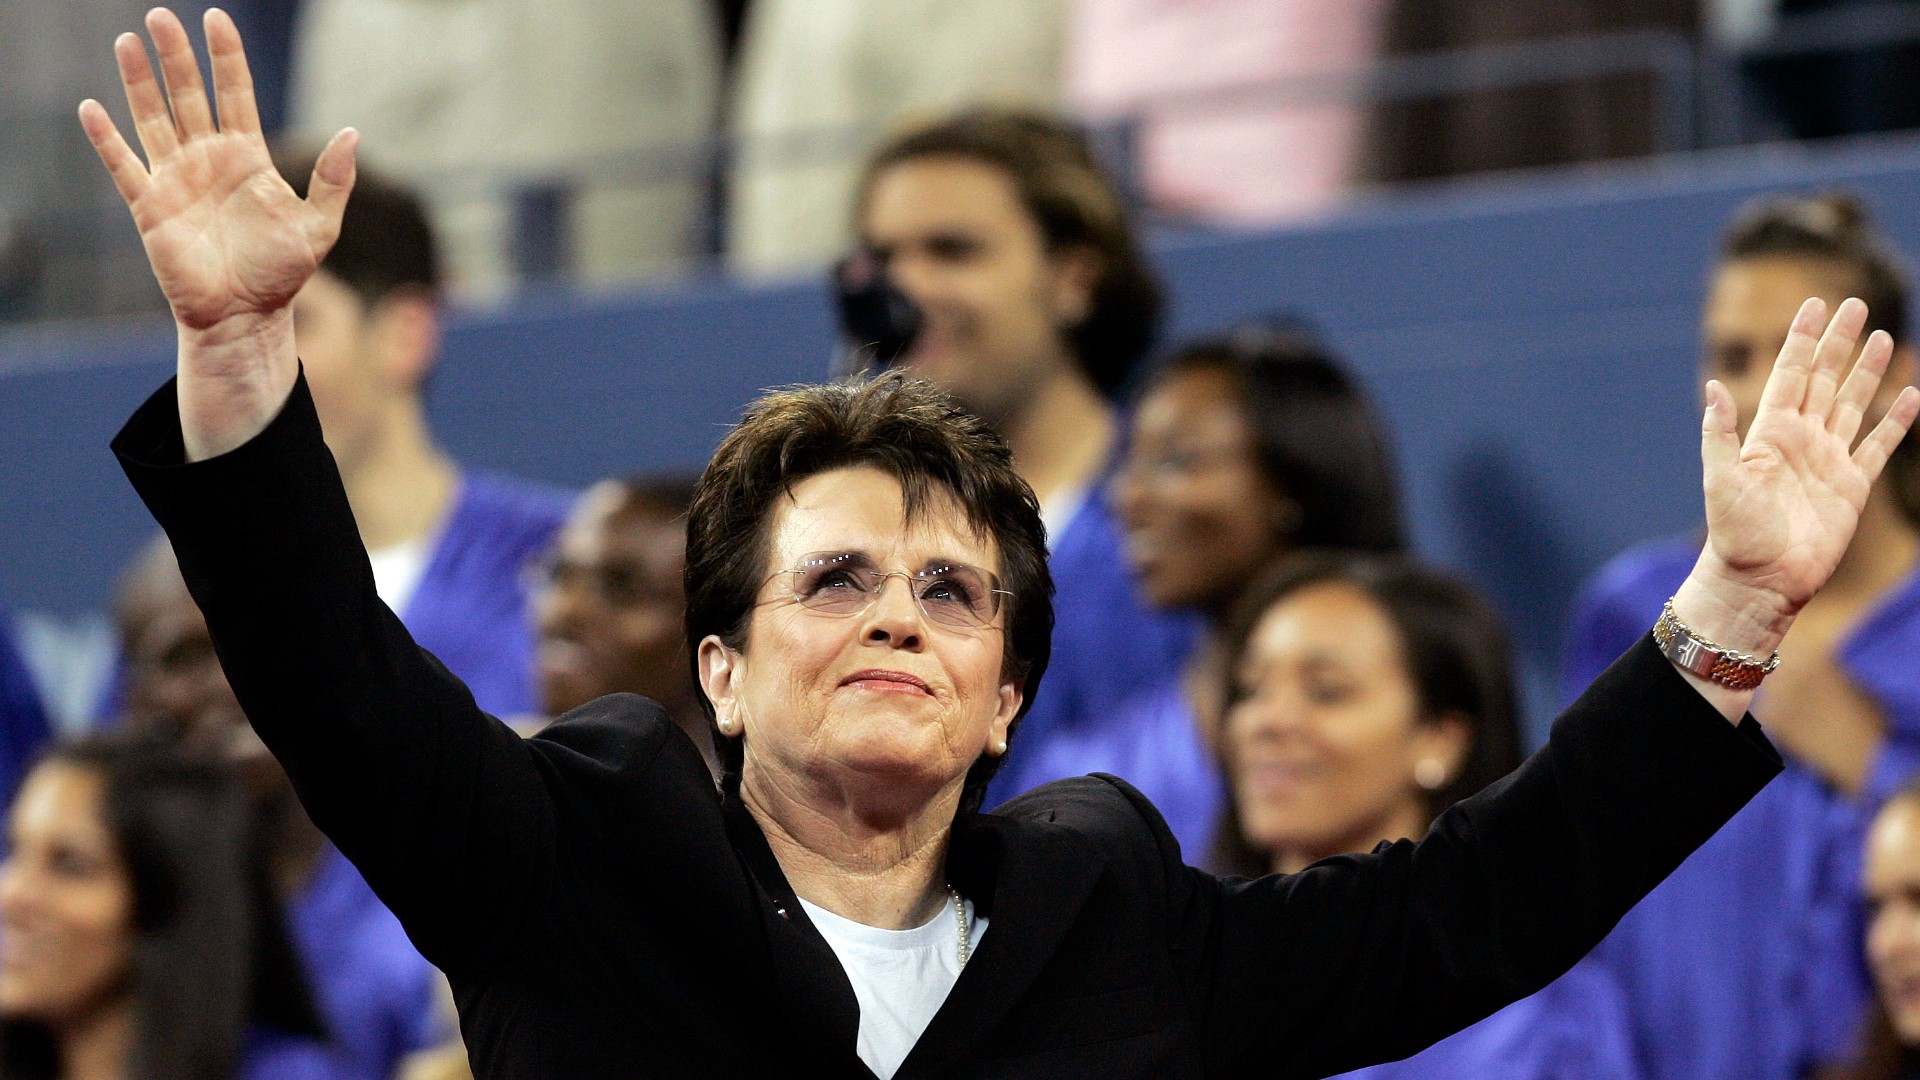 Billie Jean King, an all-time tennis great, holds 39 grand slam titles and is a member of the international tennis hall of fame.